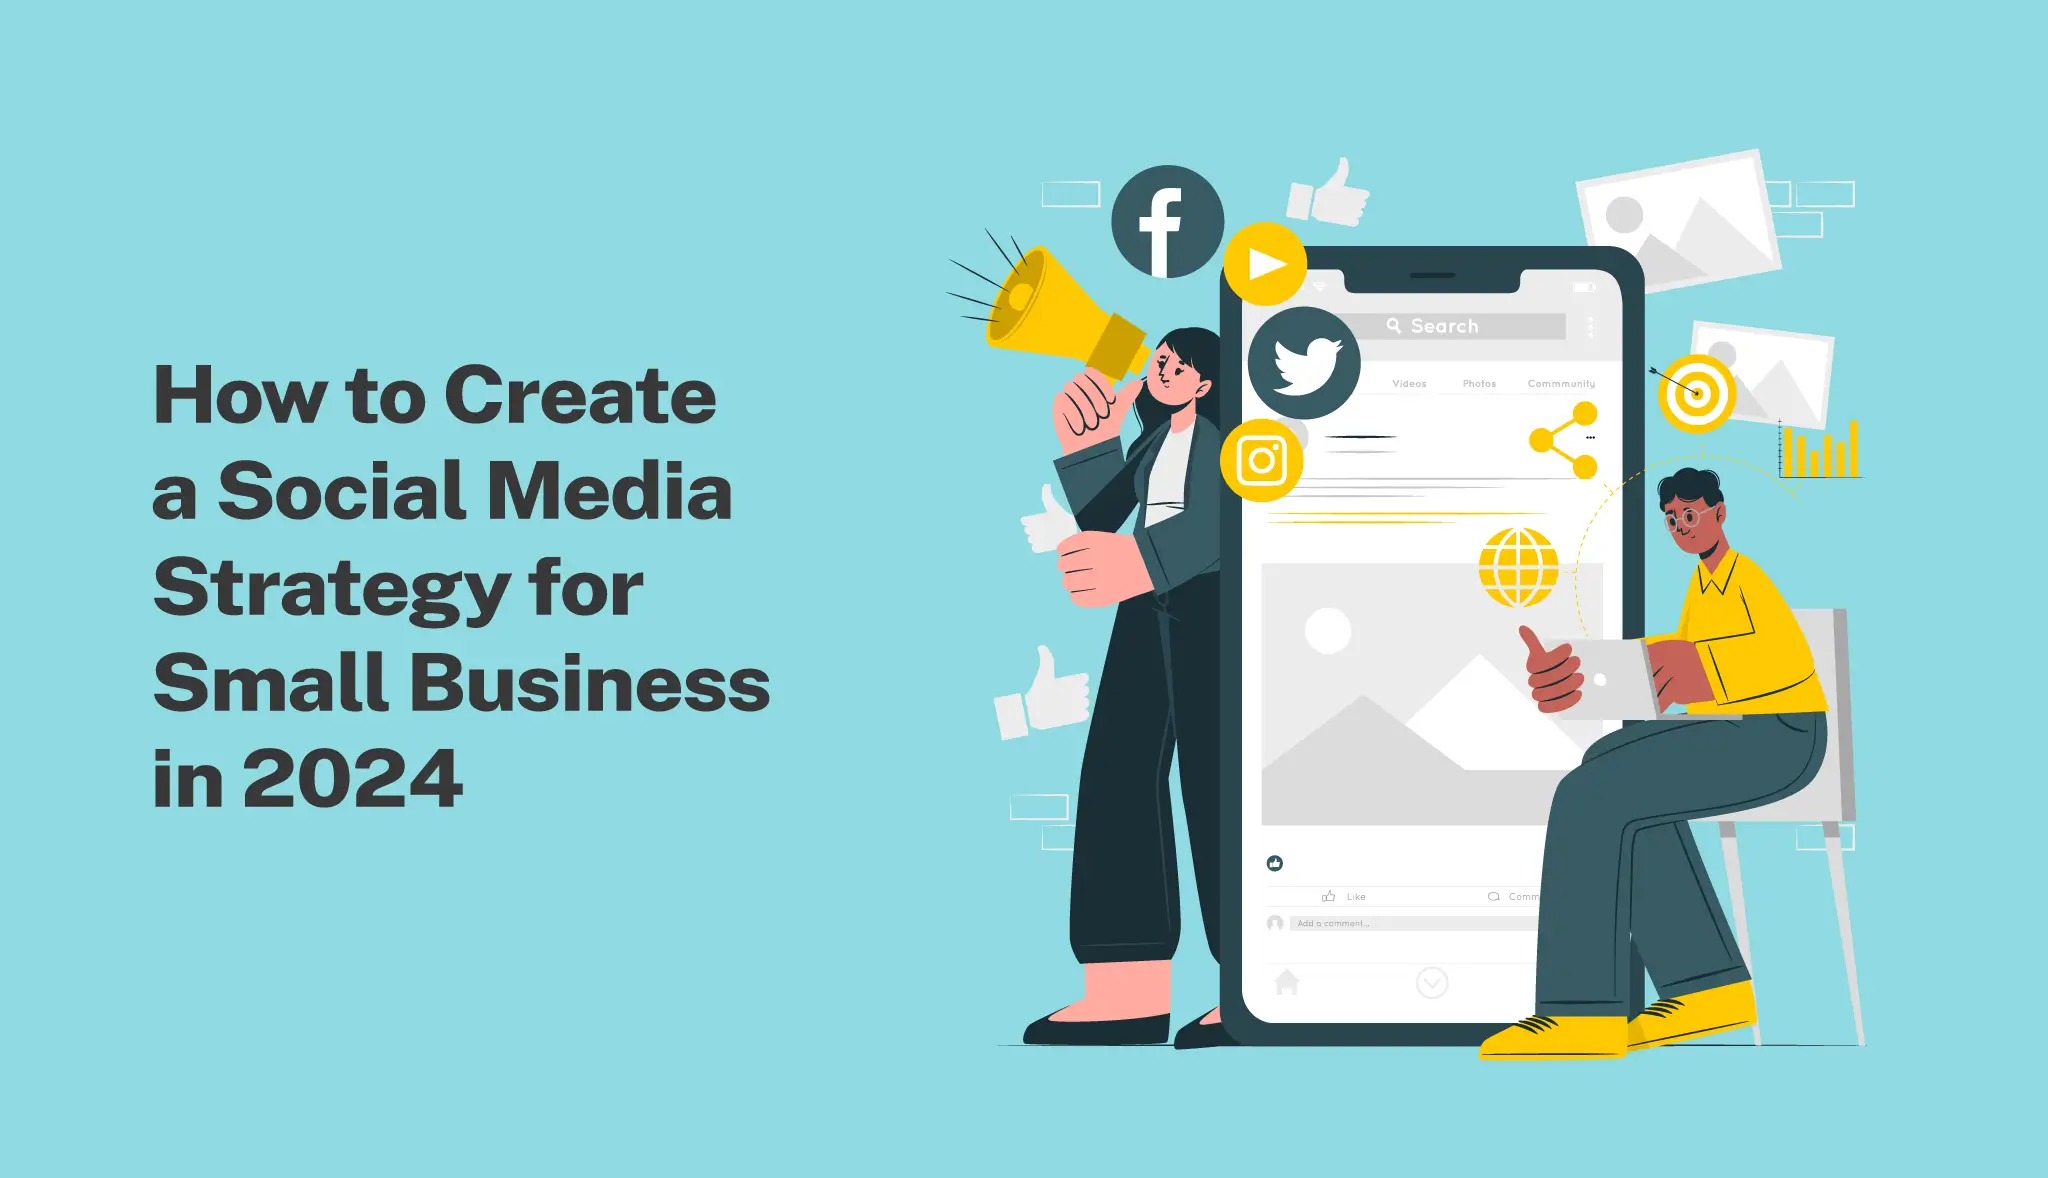 How To Create Social Media Strategy For Small Businesses In 2024